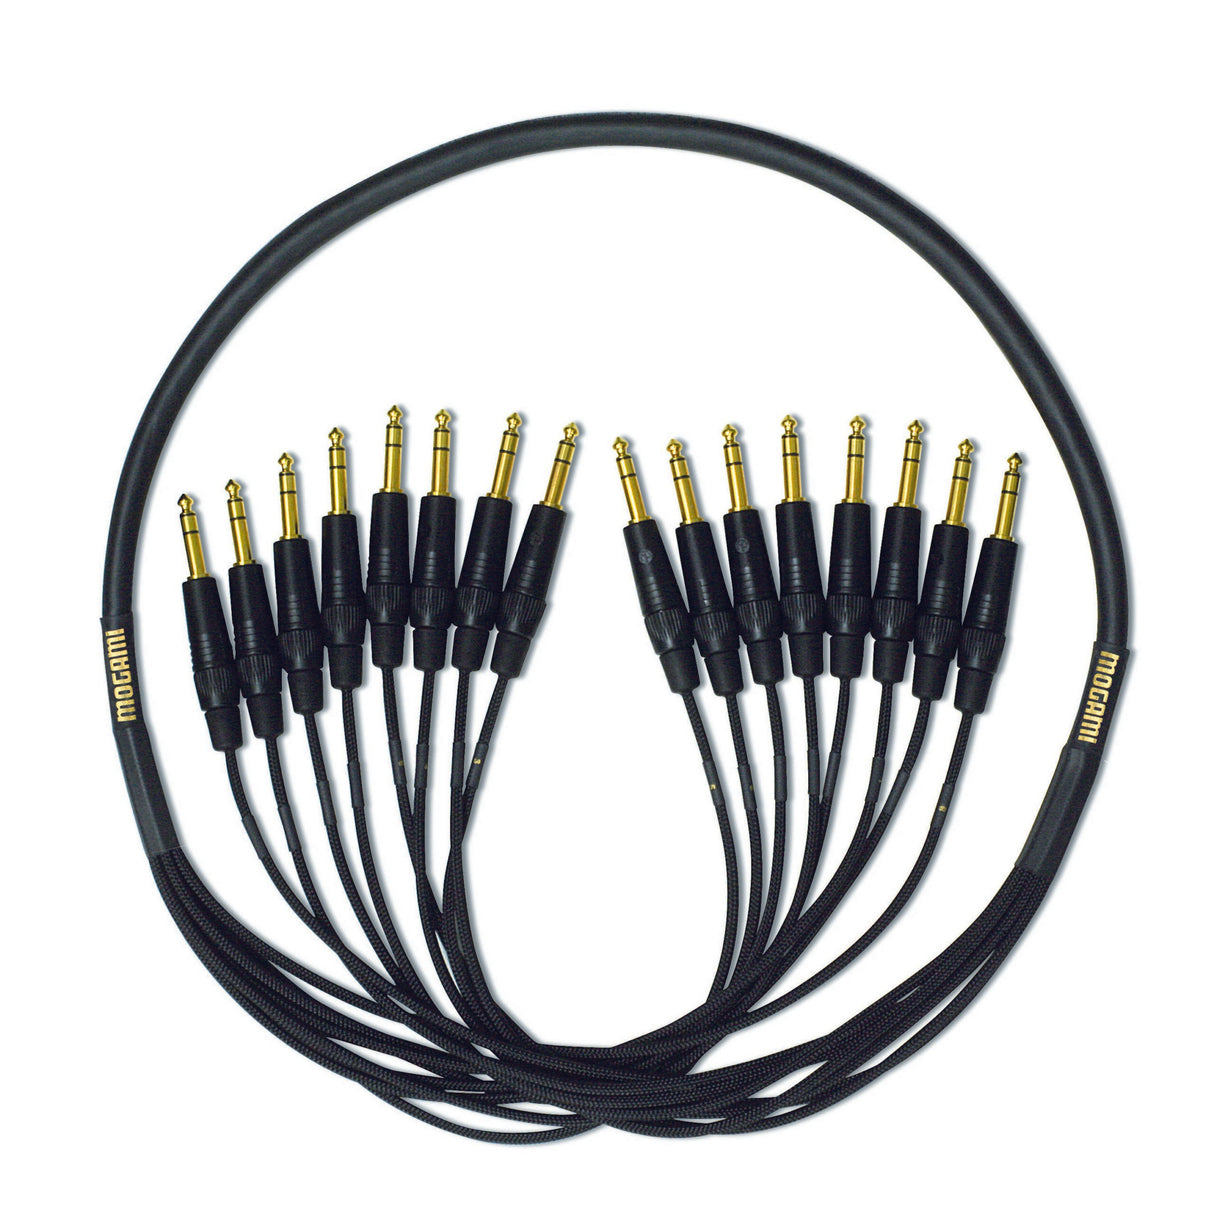 Mogami GOLD 8 TRSTRS-25 8-Channel Gold Contact Balanced 1/4 TRS to 1/4 TRS Cable, 25-Feet